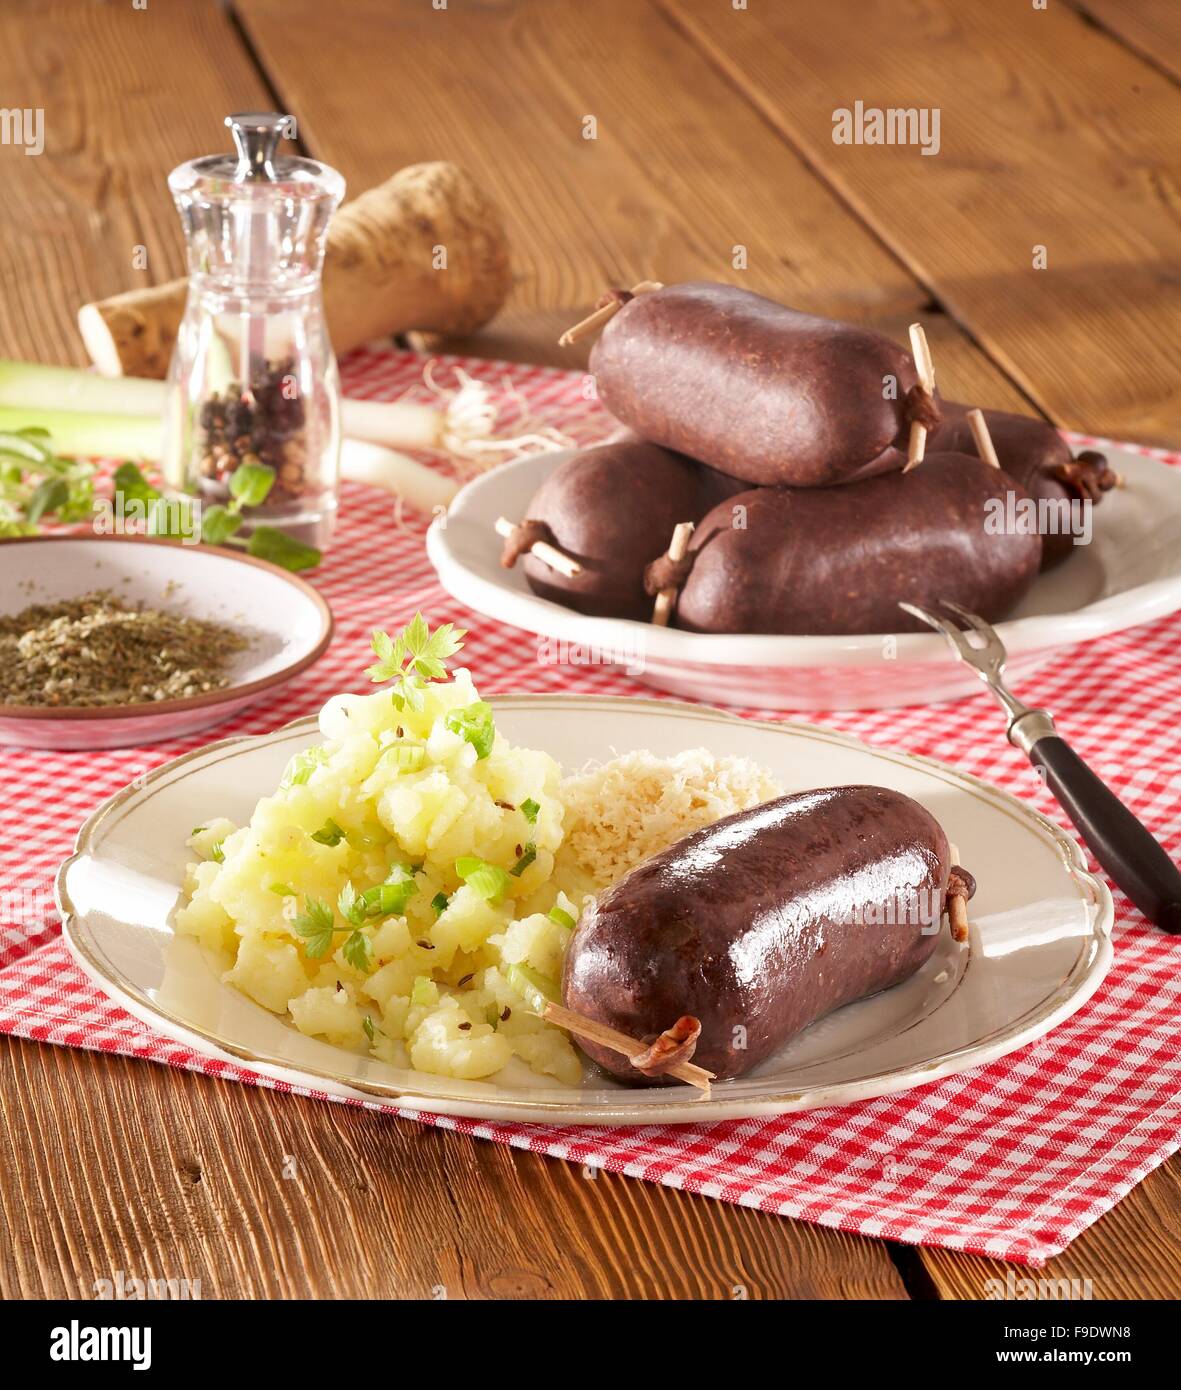 Grout Pudding Stock Photo